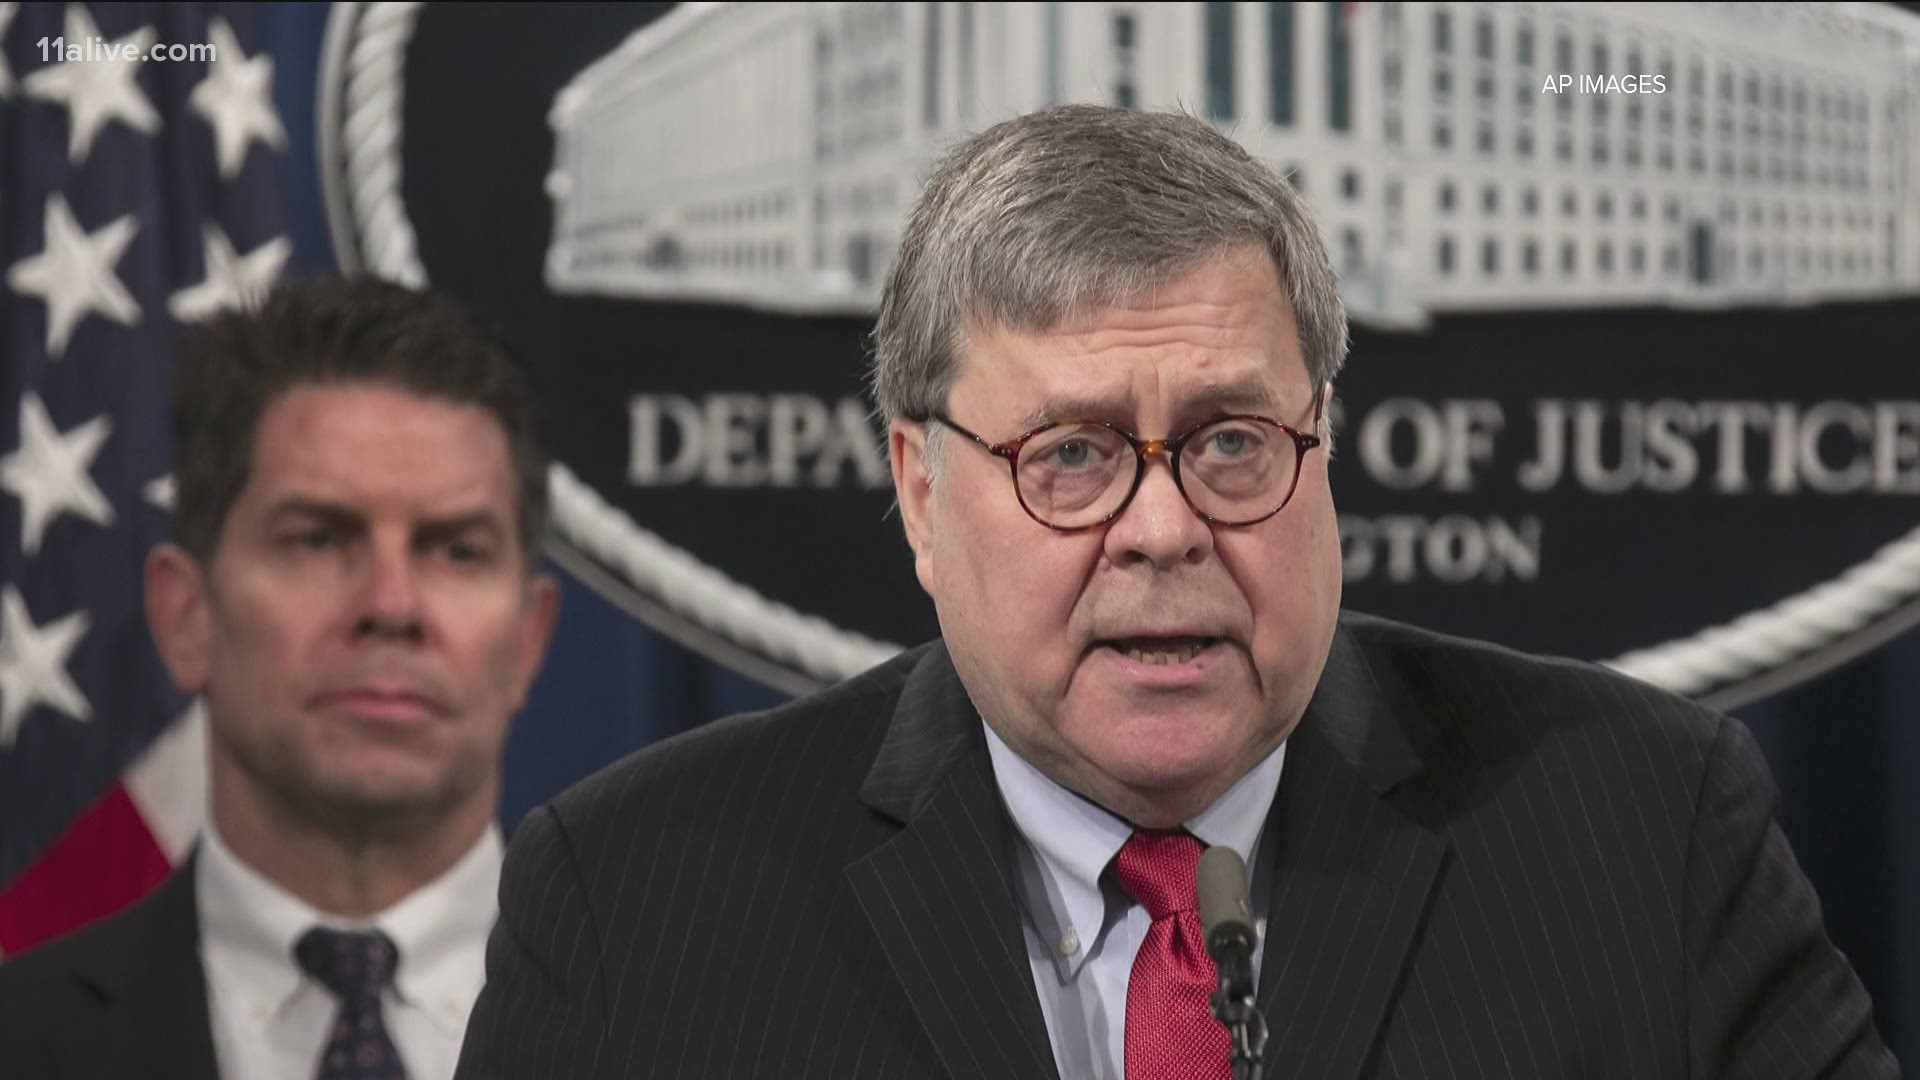 William Barr has long been a staunch supporter and defender of President Donald Trump. The president said their relationship has been 'a very good one.'